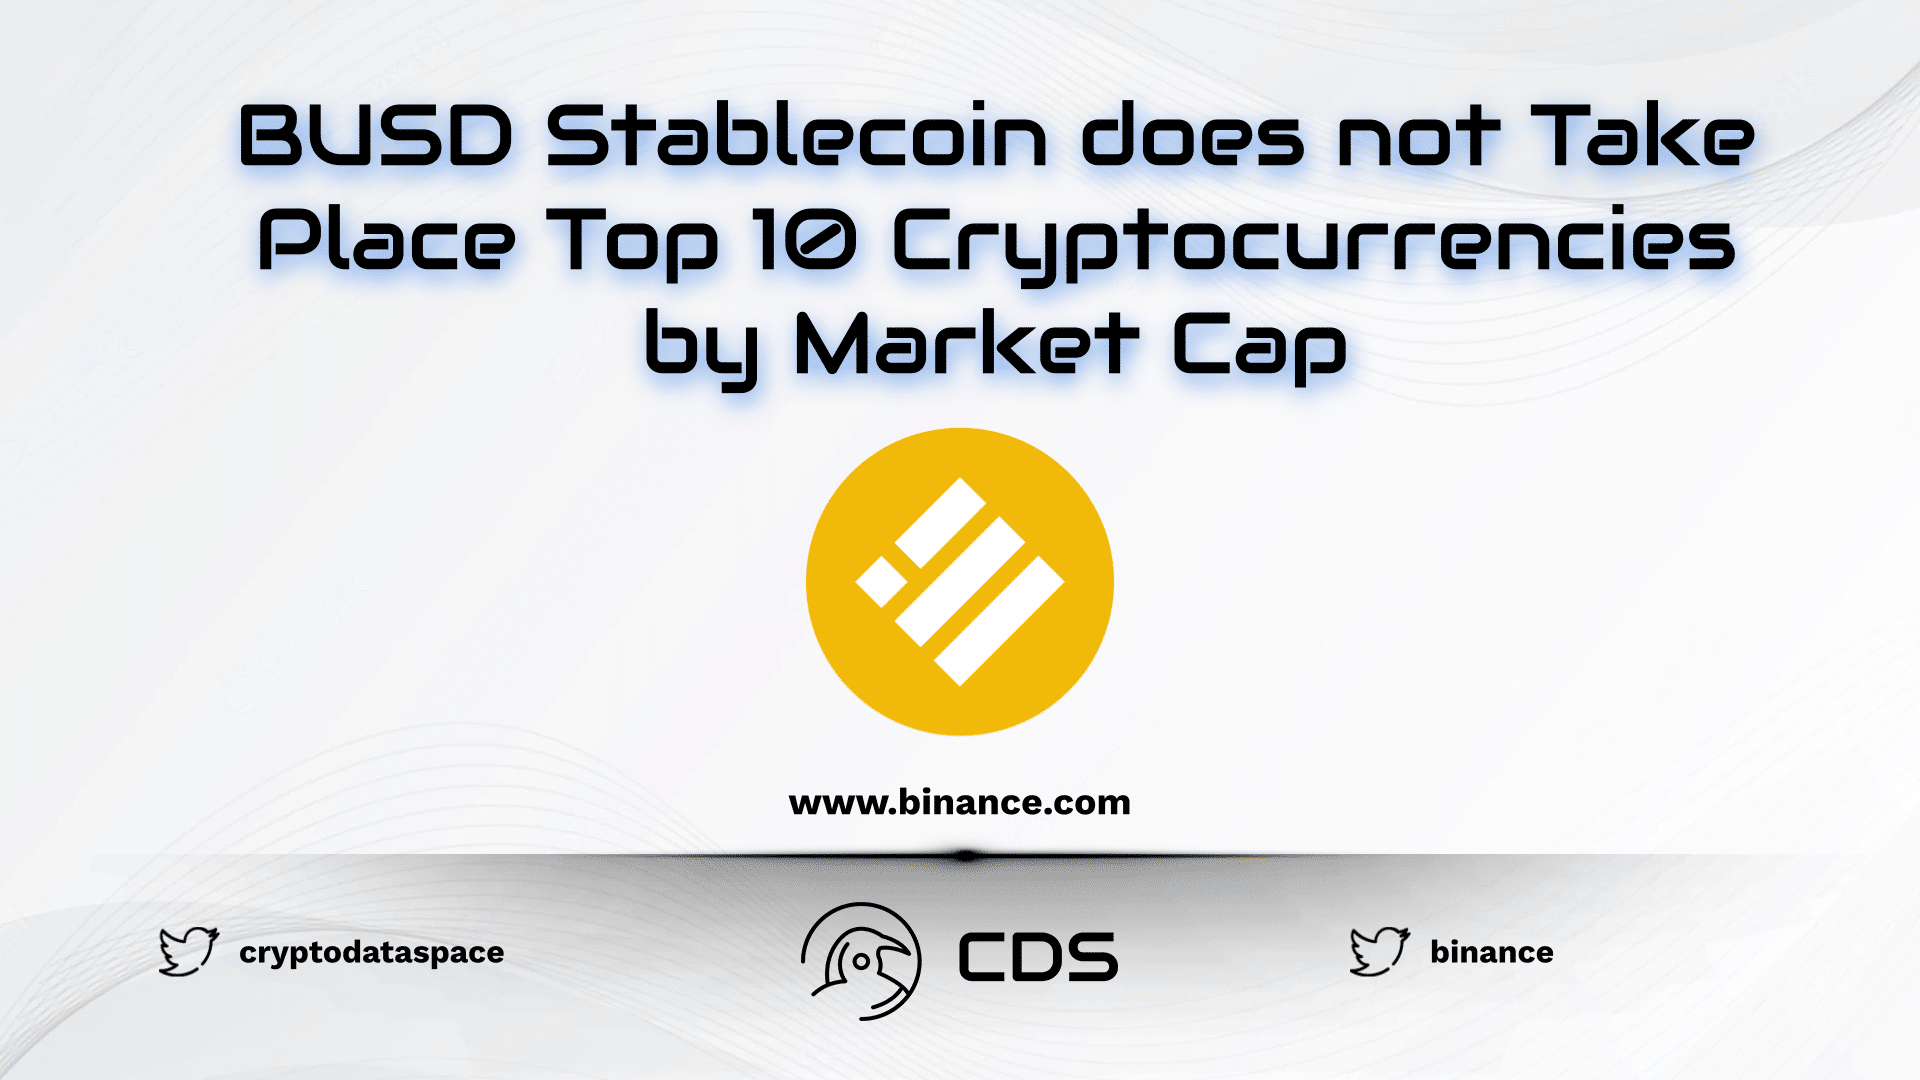 BUSD Stablecoin does not Take Place Top 10 Cryptocurrencies by Market Cap